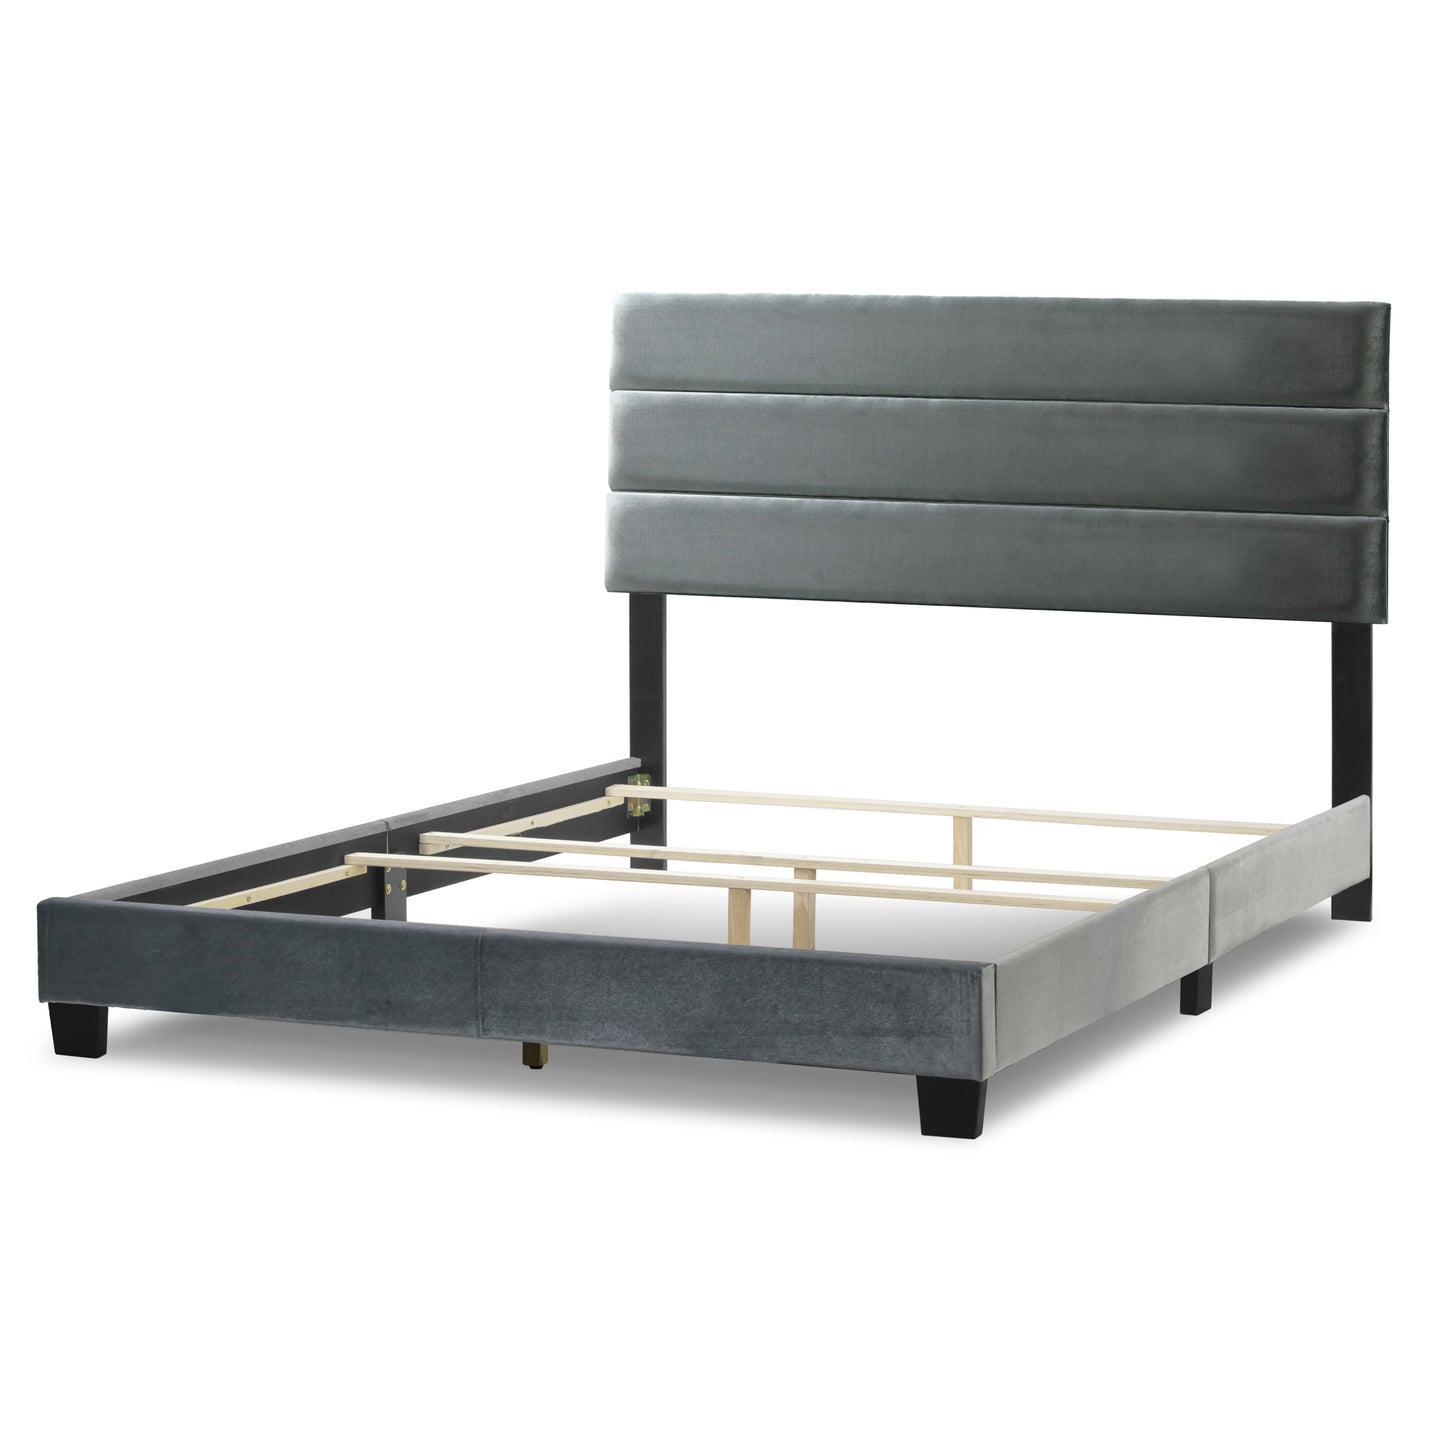 Aris Silver Grey Velvet Twin Bed with Line Stitching Tufting